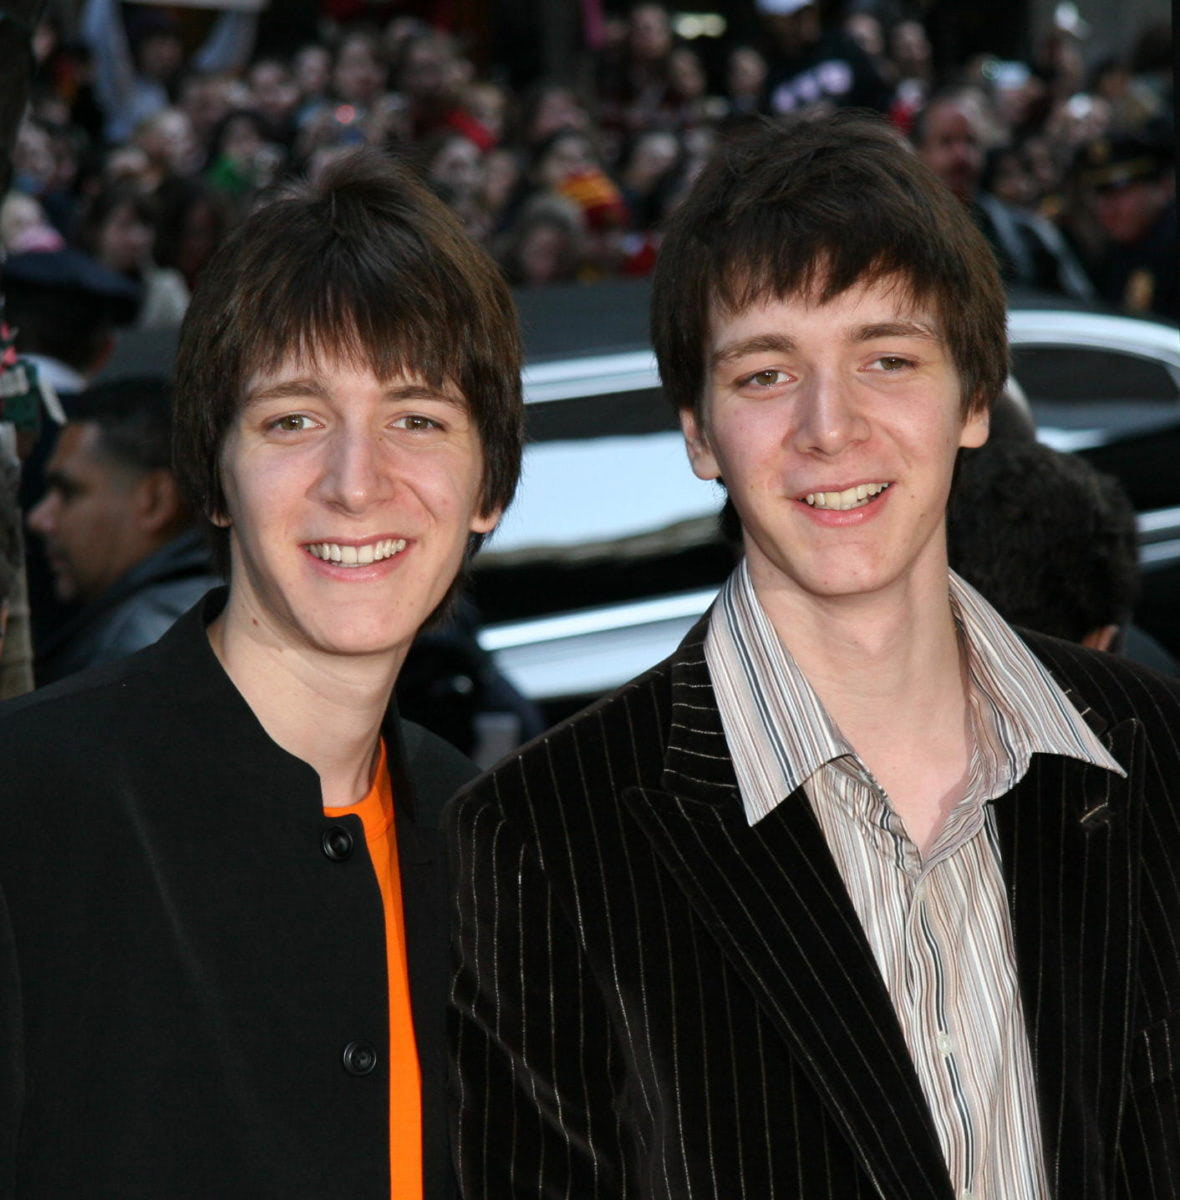 James and Oliver Phelps at the New York City ‘Goblet of Fire’ premiere